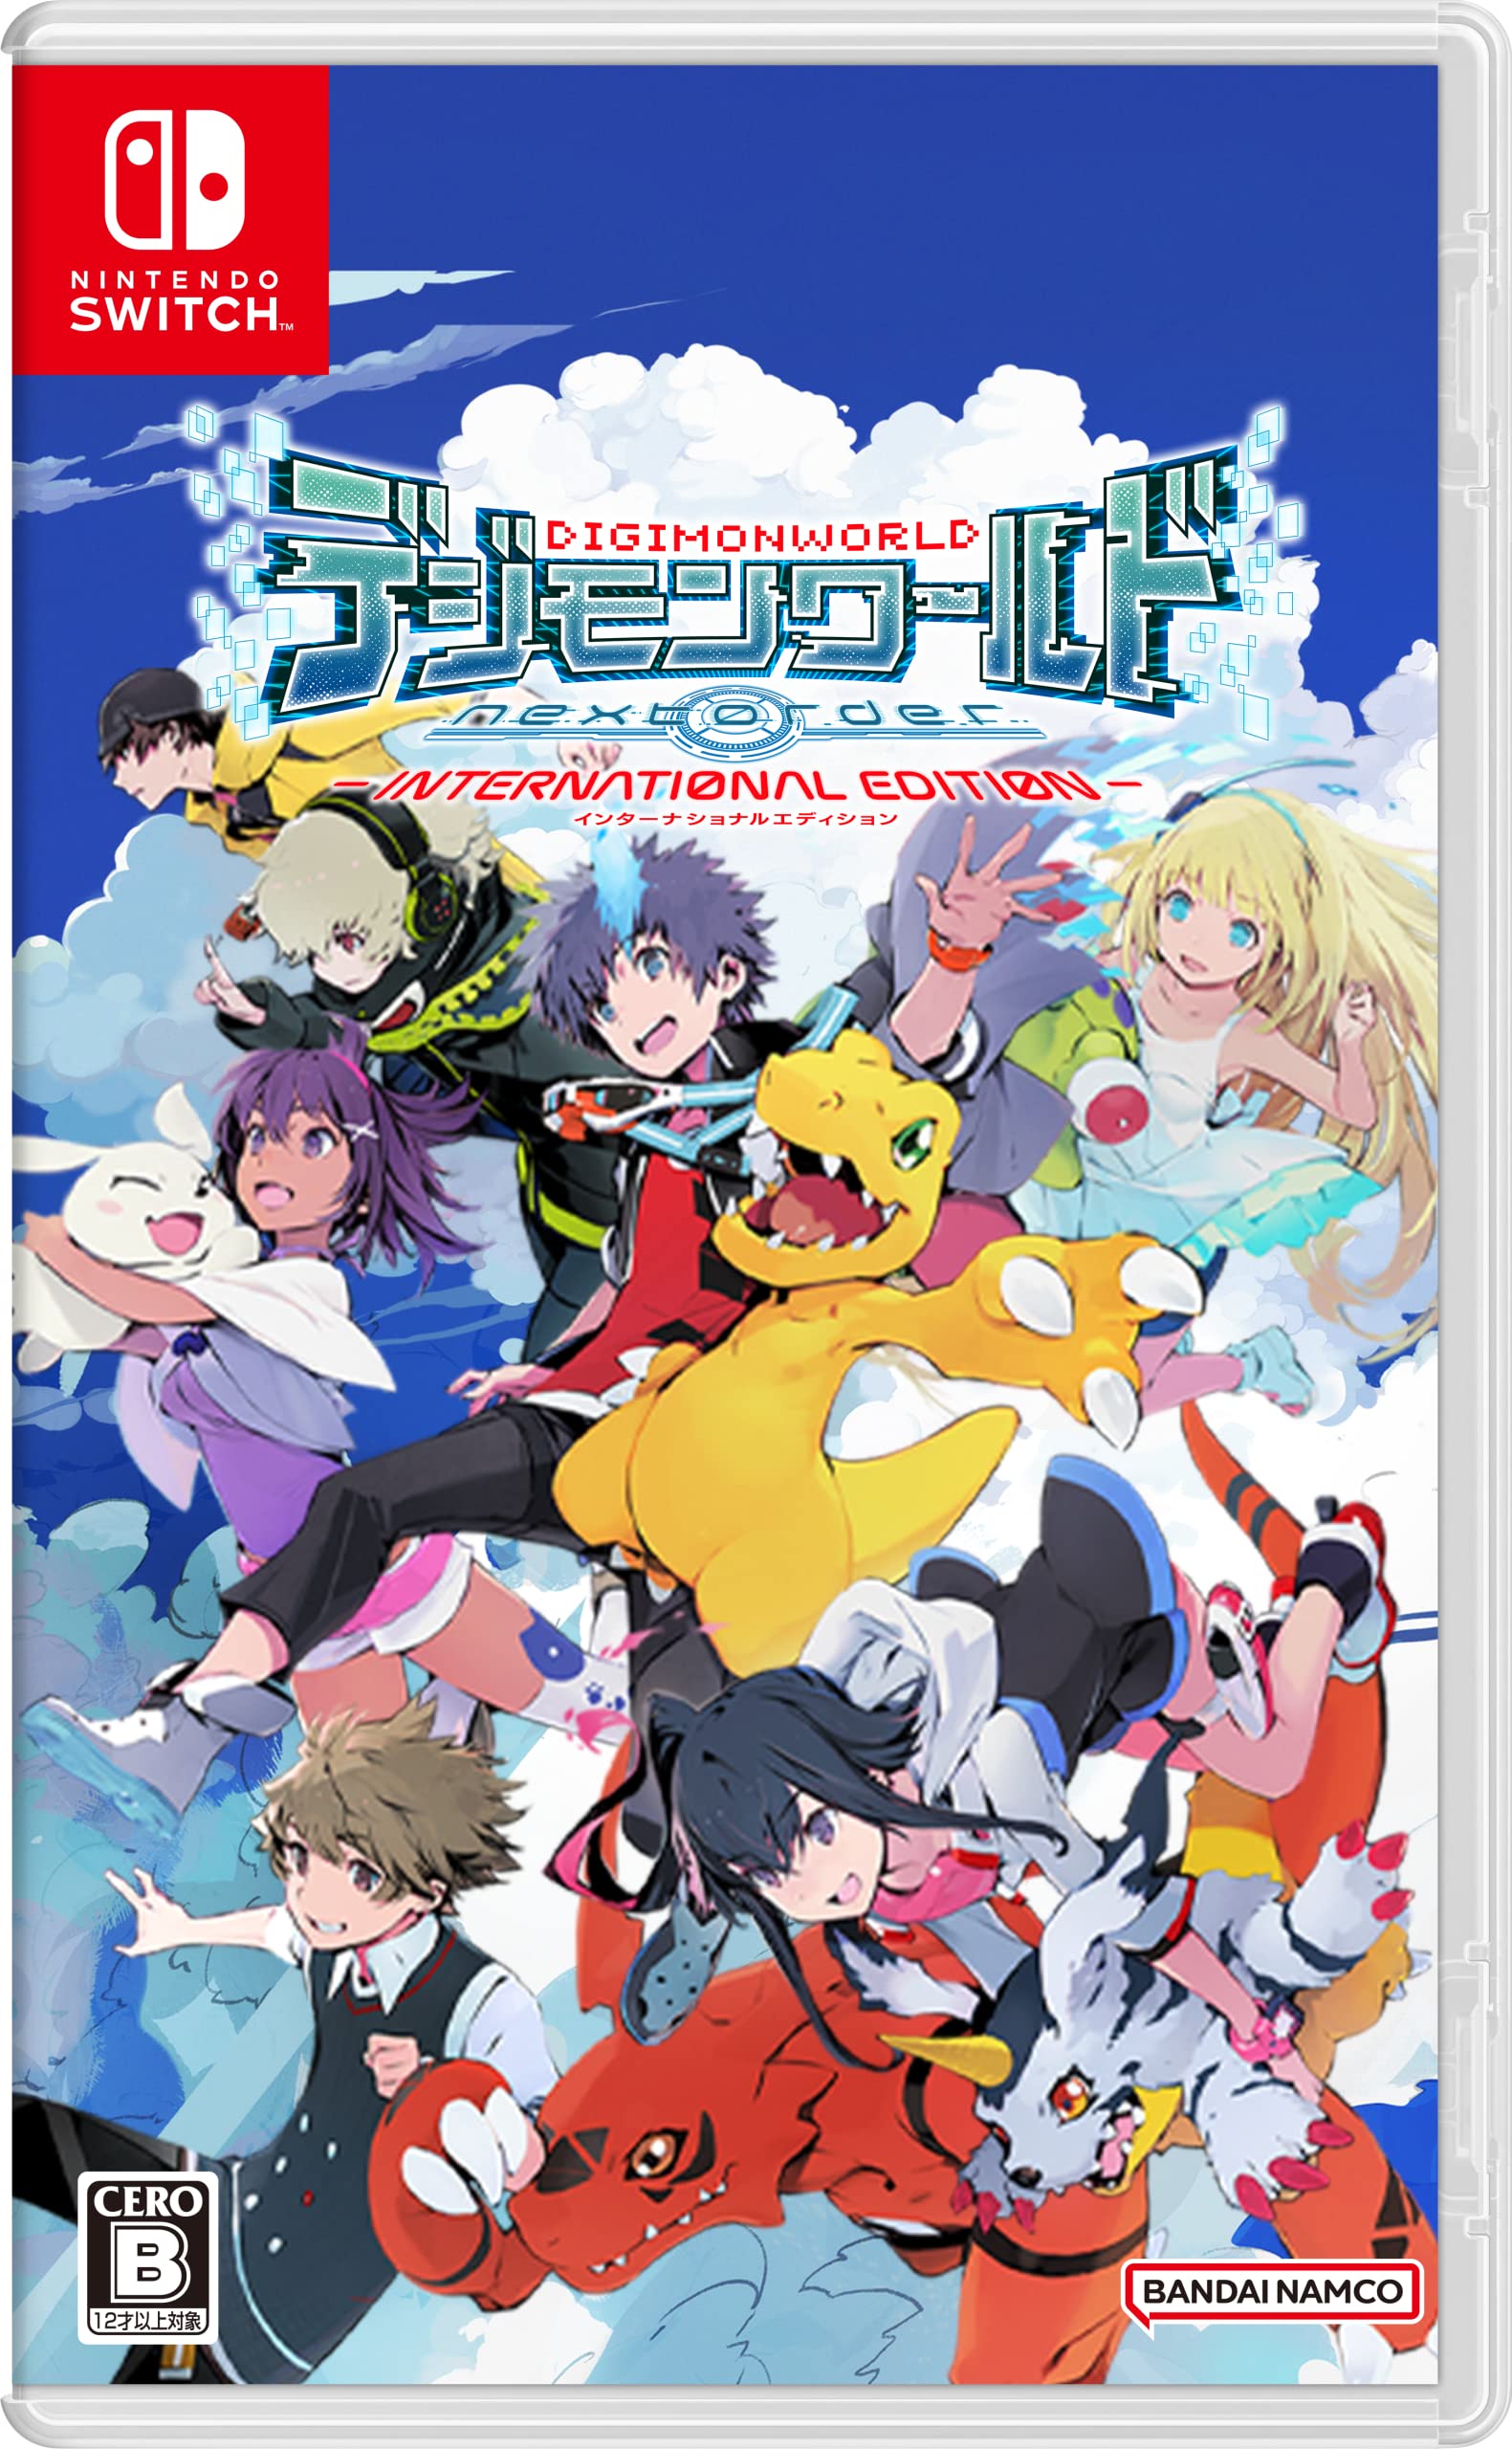 Next Order Switch Updates Japanese Coverart And Pre Order Bonus. With The Will // Digimon Forums